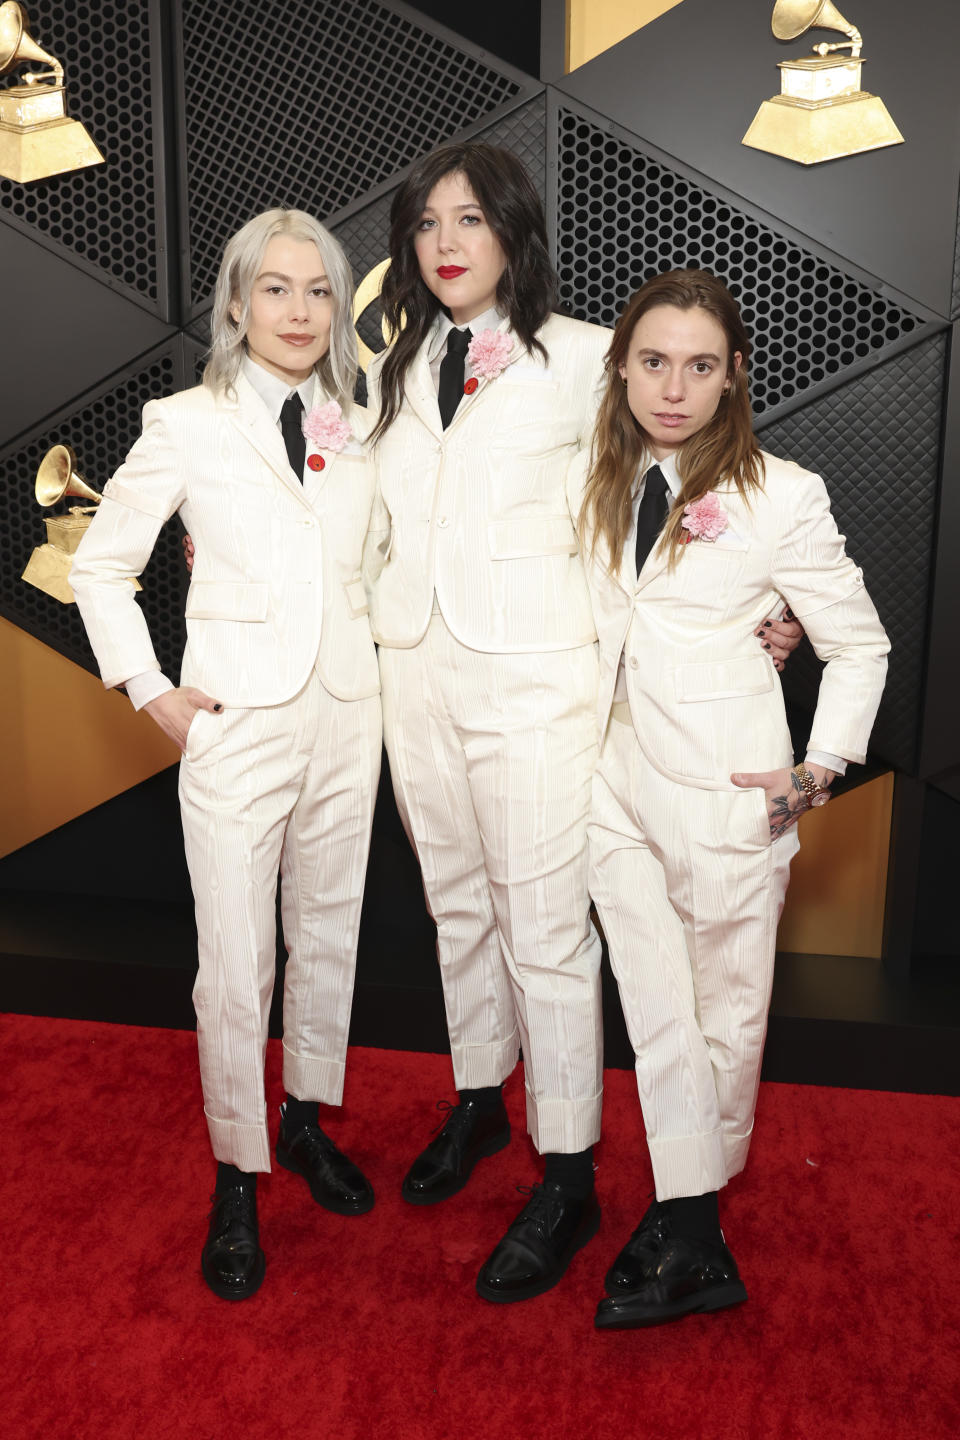 boygenius wearing matching thom browne at the Grammys.  (Image via Getty Images)